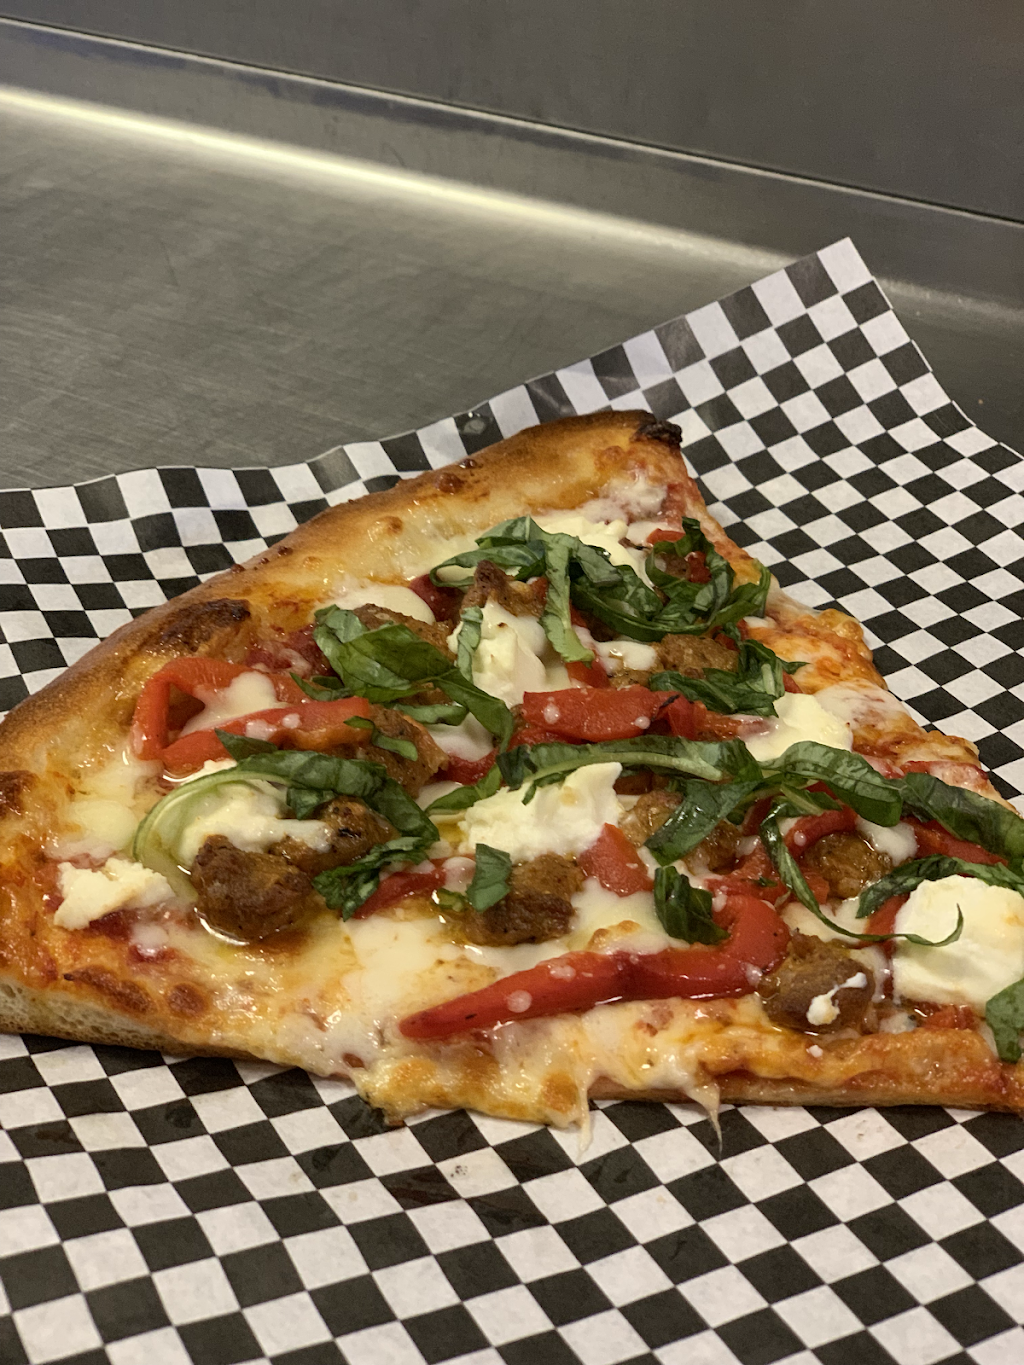 Classic Crust Pizza Takeout and Delivery | 2150 E Cactus Rd #130, Phoenix, AZ 85022 | Phone: (602) 609-6865